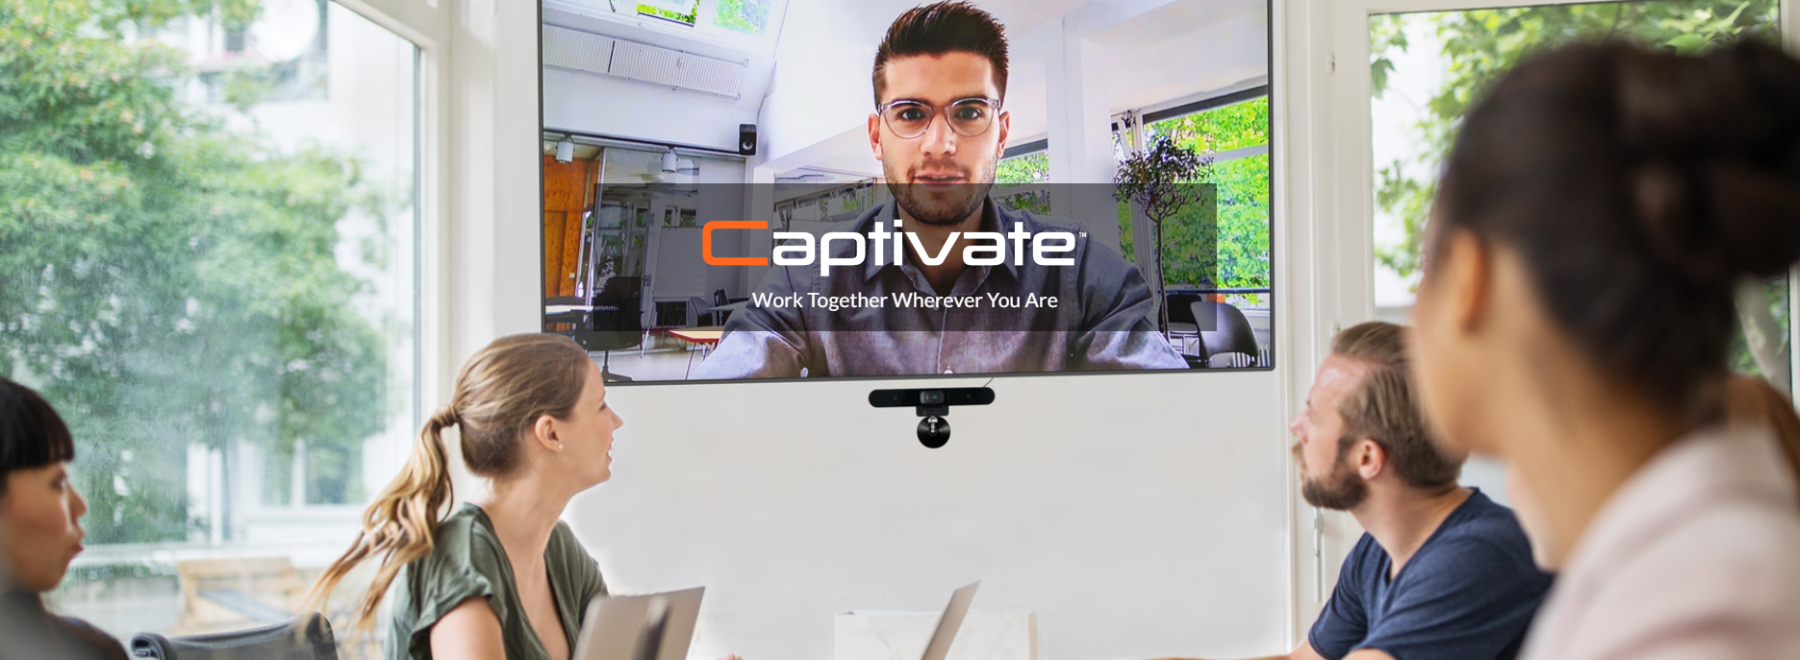 atlona_captivate_banner_1800x660px.png